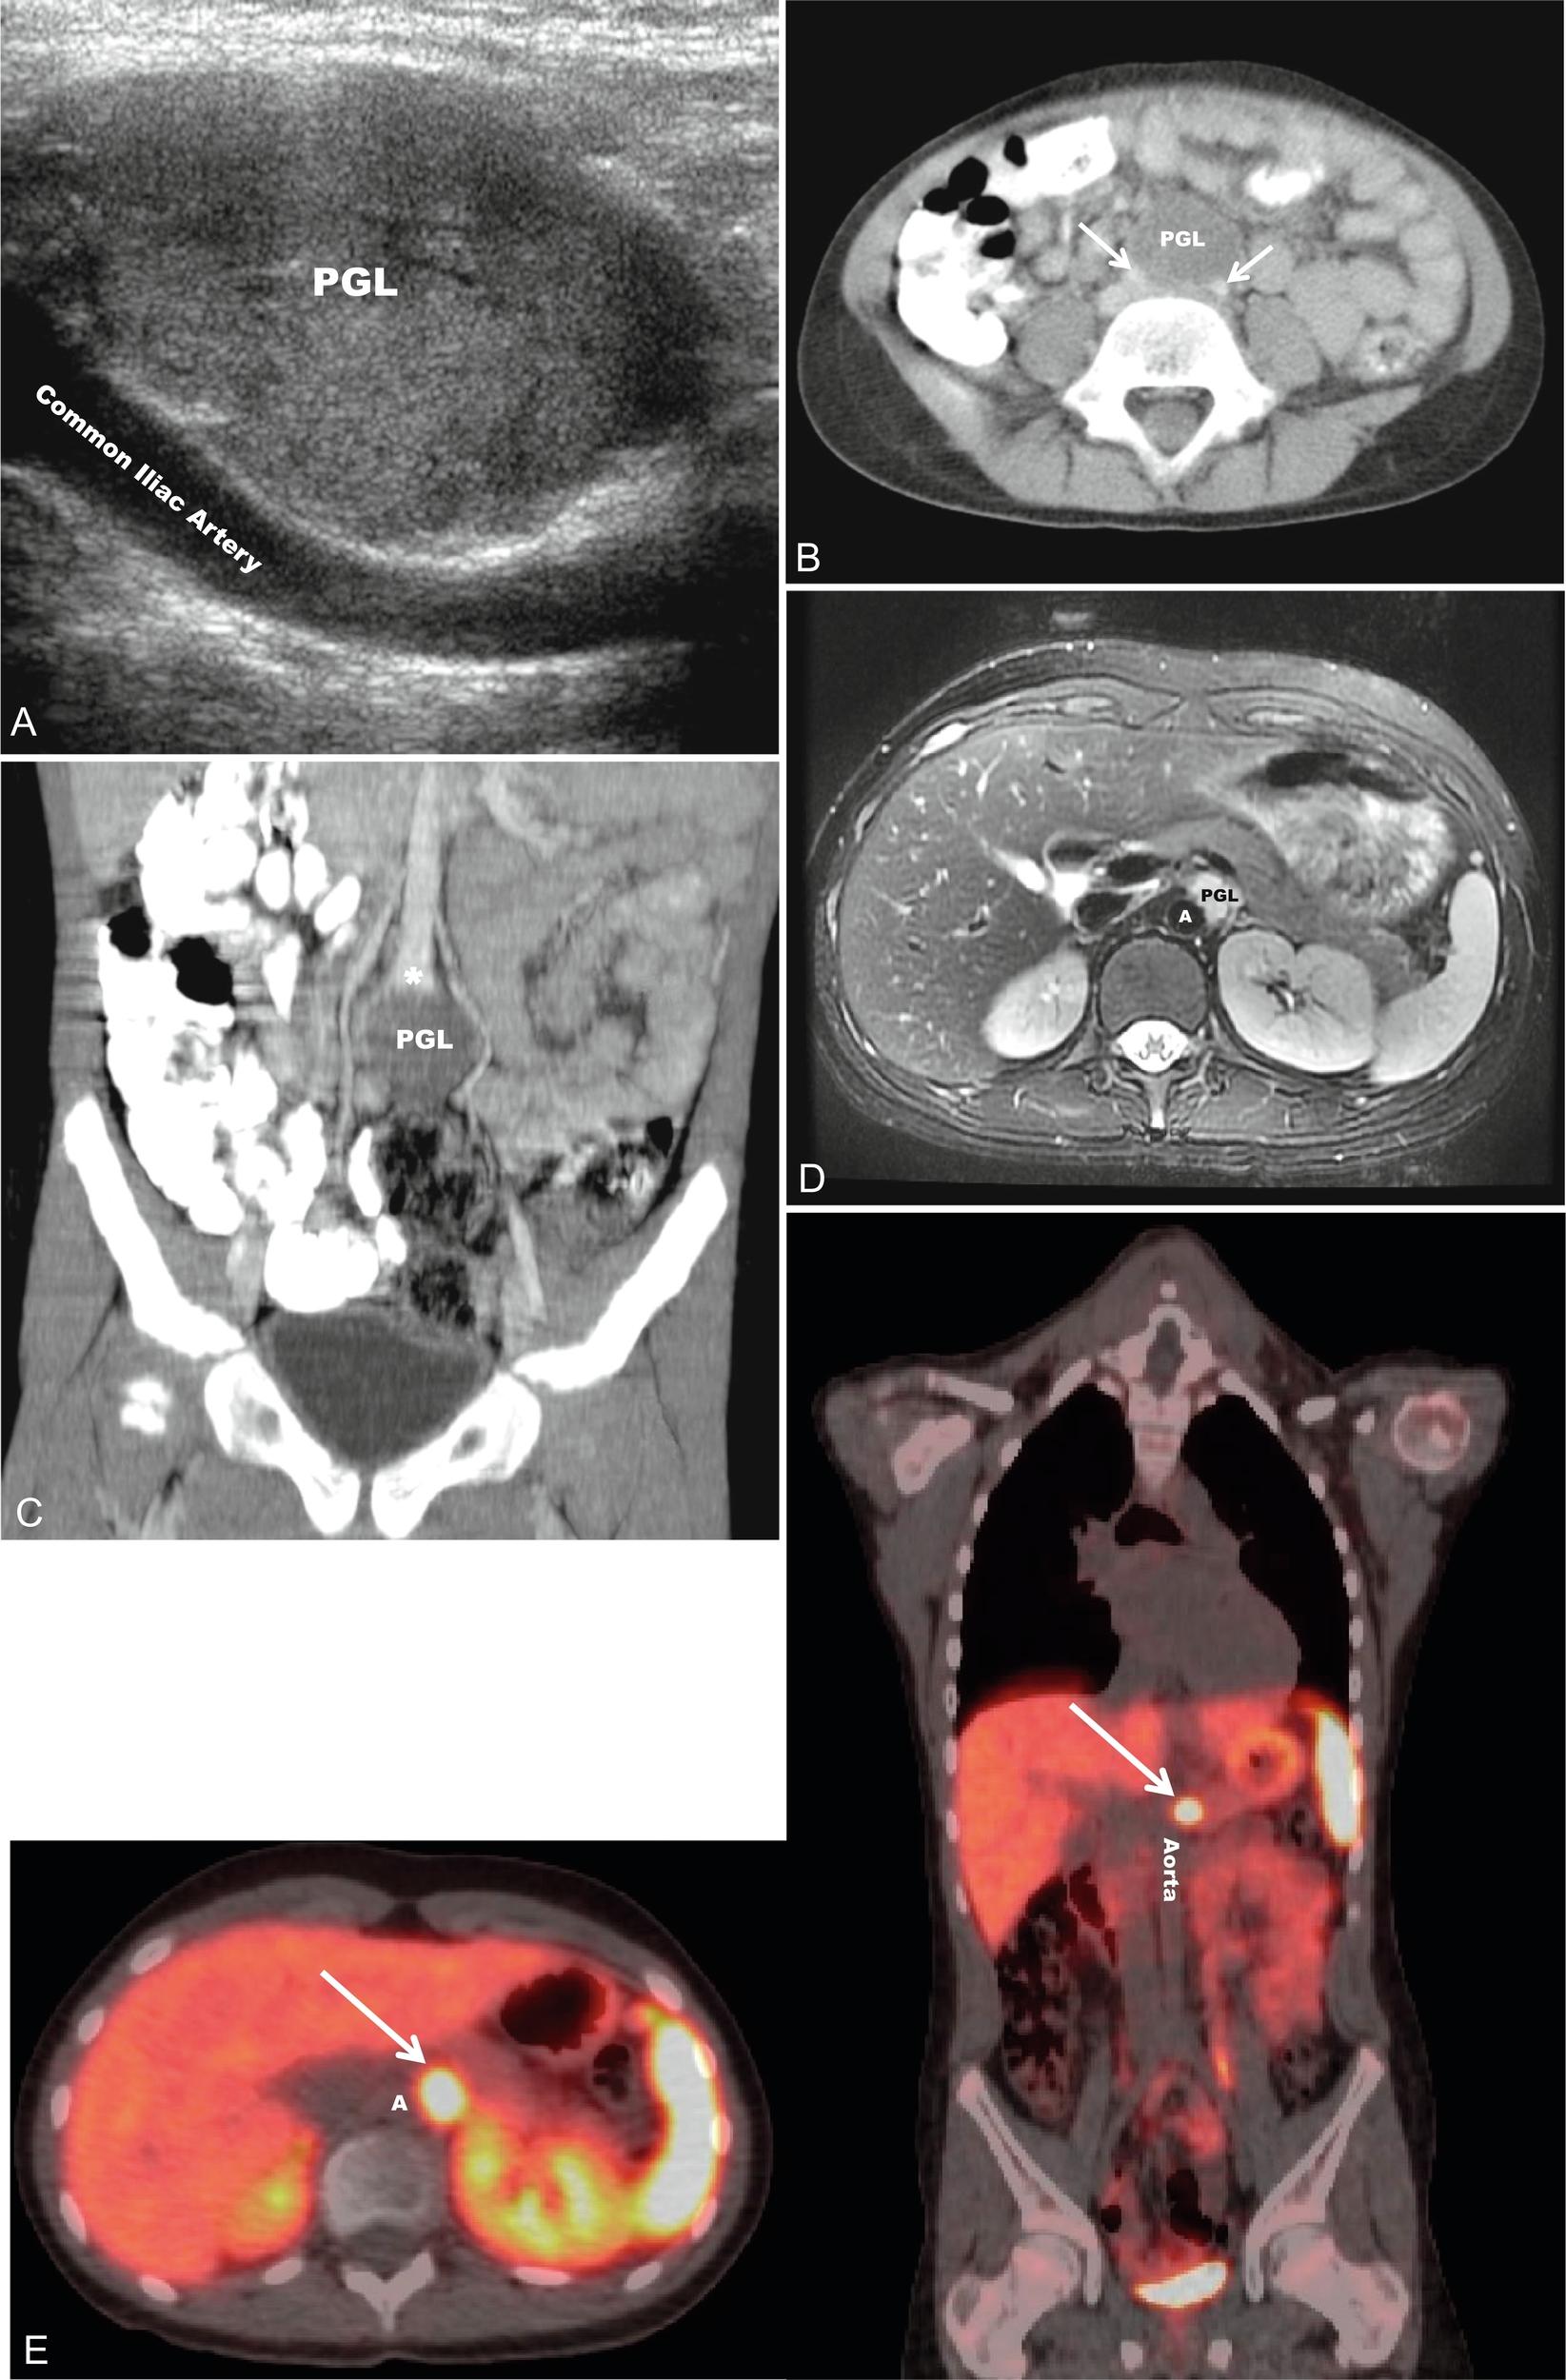 Fig. 15.2, A 6-year-old female with a paraganglioma (PGL) and an SDHB mutation presented with severe hypertension during a well-child examination. A, Abdominal ultrasound (sagittal view) revealed a homogeneous, hypervascular 3.3-cm mass next to the common iliac arteries. Axial computed tomography (CT) postcontrast (B) ( arrows , common iliac arteries) with coronal reconstruction (C) confirmed a tumor at the aortic bifurcation (asterisk) . A 13-year-old boy with an SDHB mutation developed elevated blood pressures and abnormal norepinephrine, normetanephrine, and chromogranin A levels during prospective screening. T2-weighted axial images from abdominal magnetic resonance imaging (D) revealed a 2-cm paraaortic mass (PGL) between the origins of the celiac axis and superior mesenteric artery that was T2 hyperintense. This was subsequently confirmed via functional imaging with 68Ga-DOTATATE positron emission tomography/CT (E) to be a paraganglioma ( arrows ). A, Aorta.